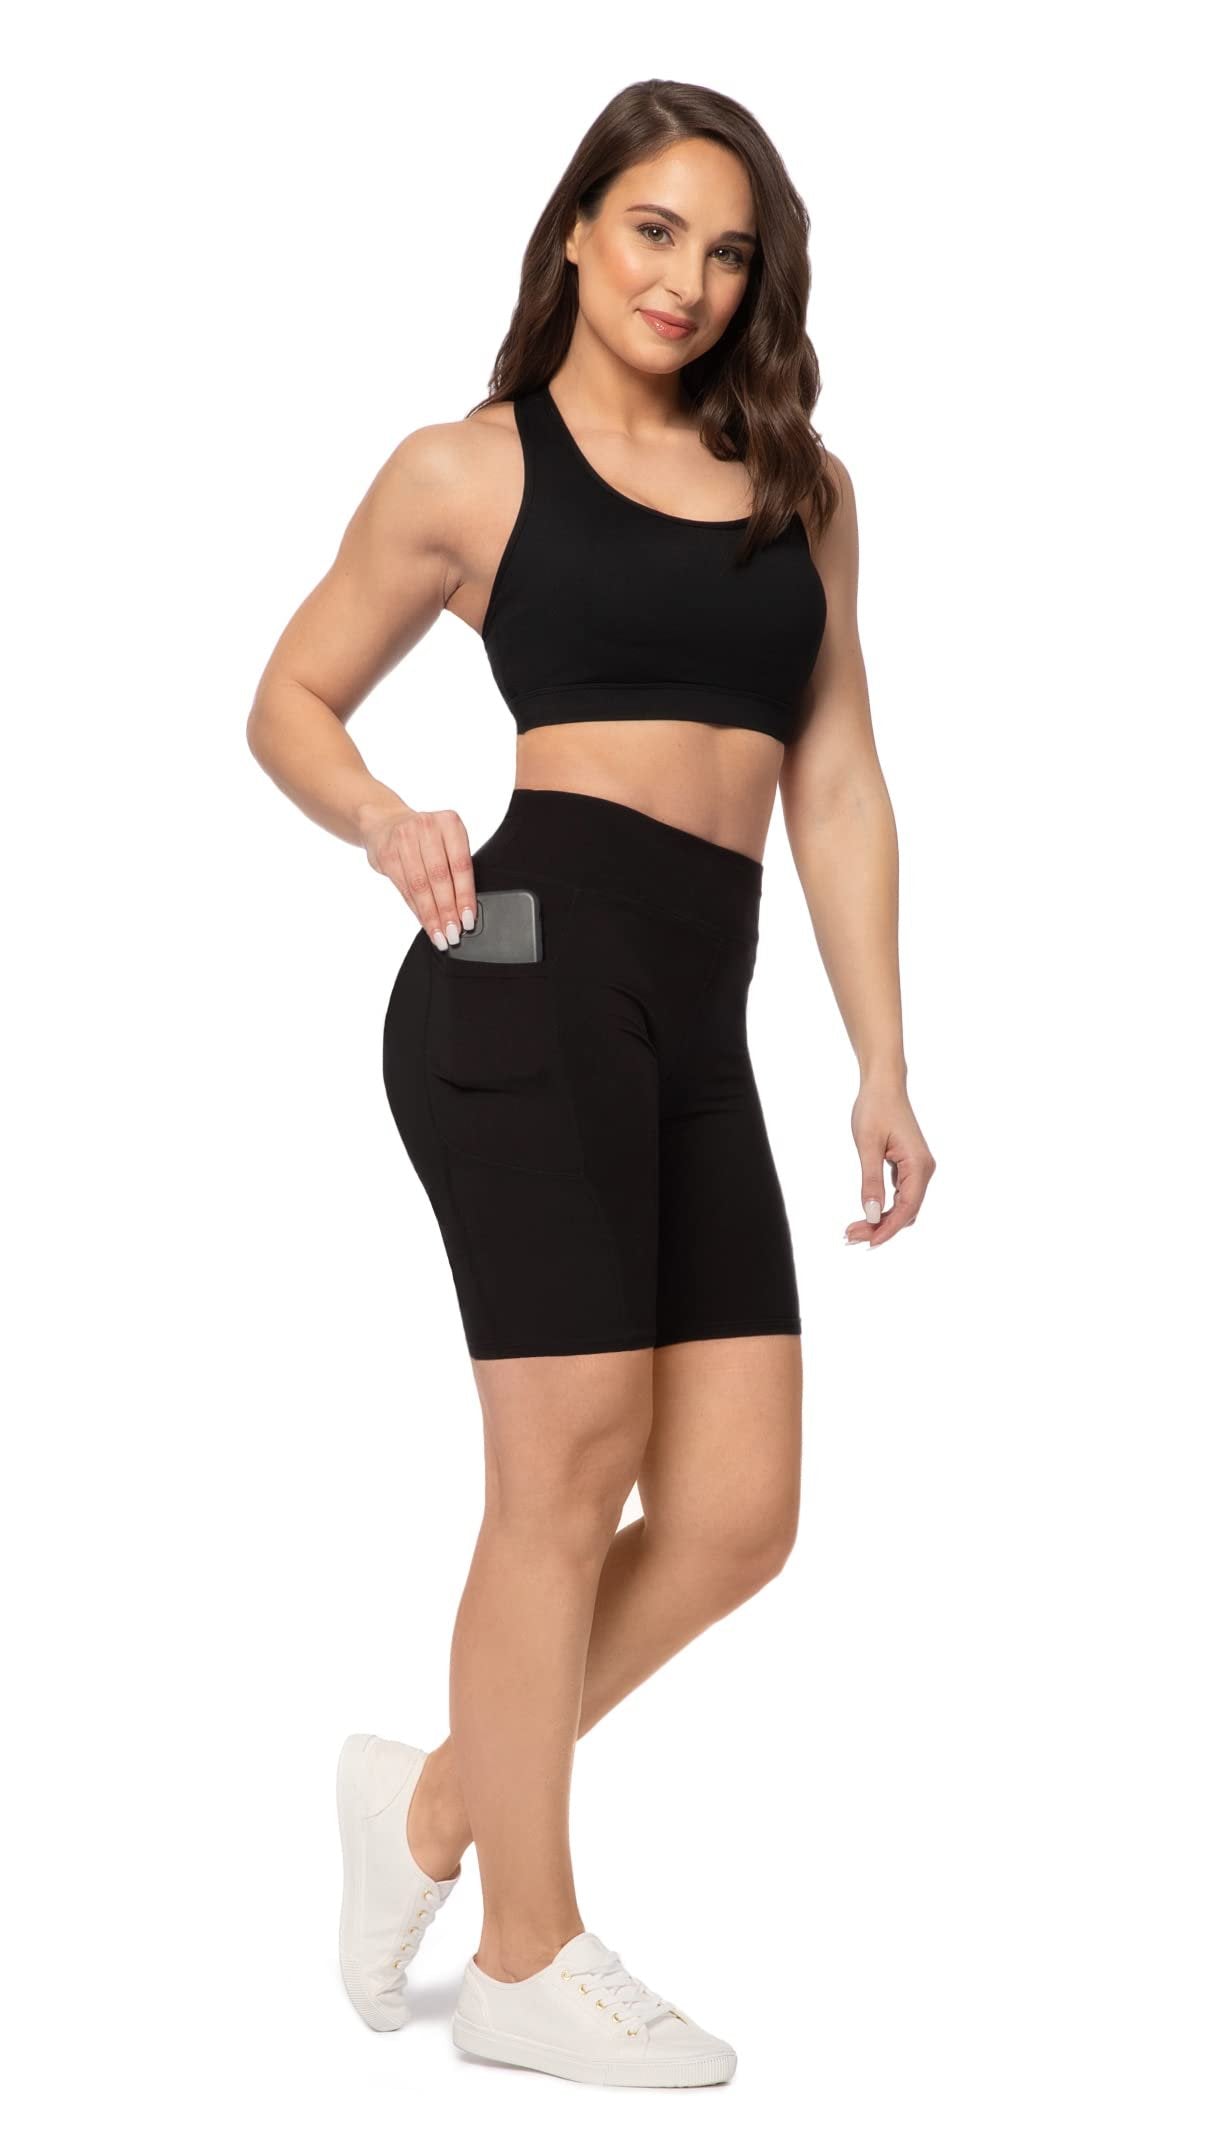 SATINA High Waisted Black Biker Shorts for Women - with & Without Pockets - 5'' and 8'' Inseam